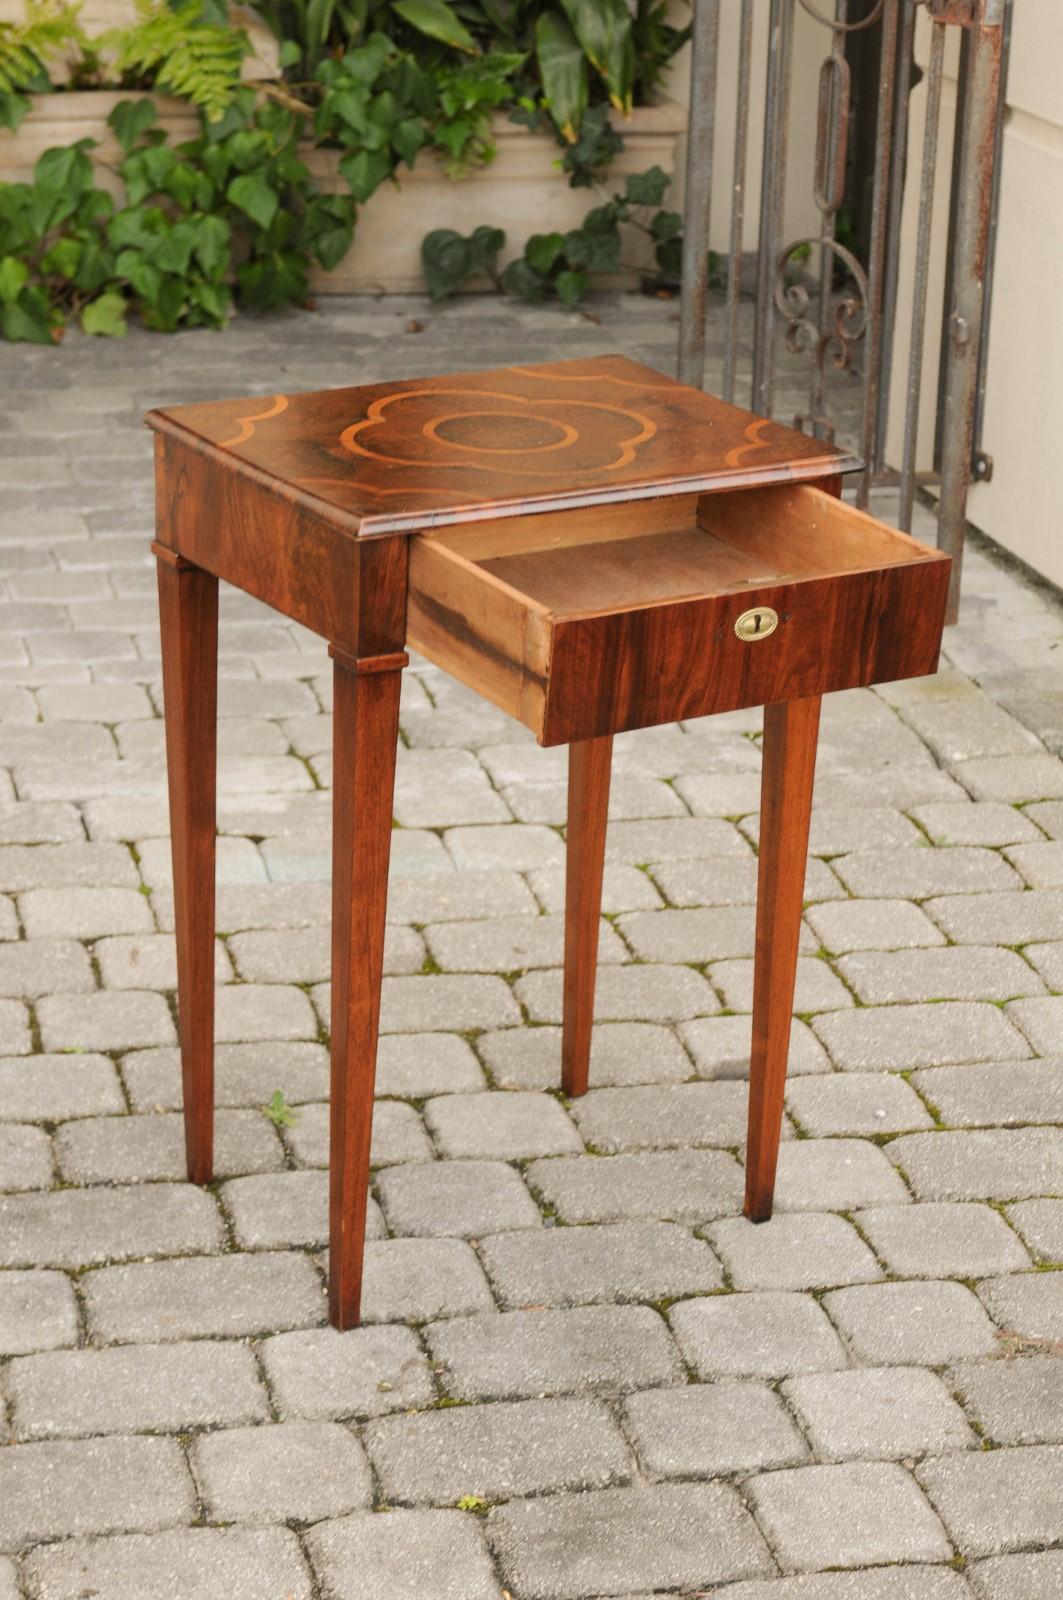 Italian 1820s Walnut Side Table with Oyster Veneer and Inlaid Quadrilobe Motif For Sale 1